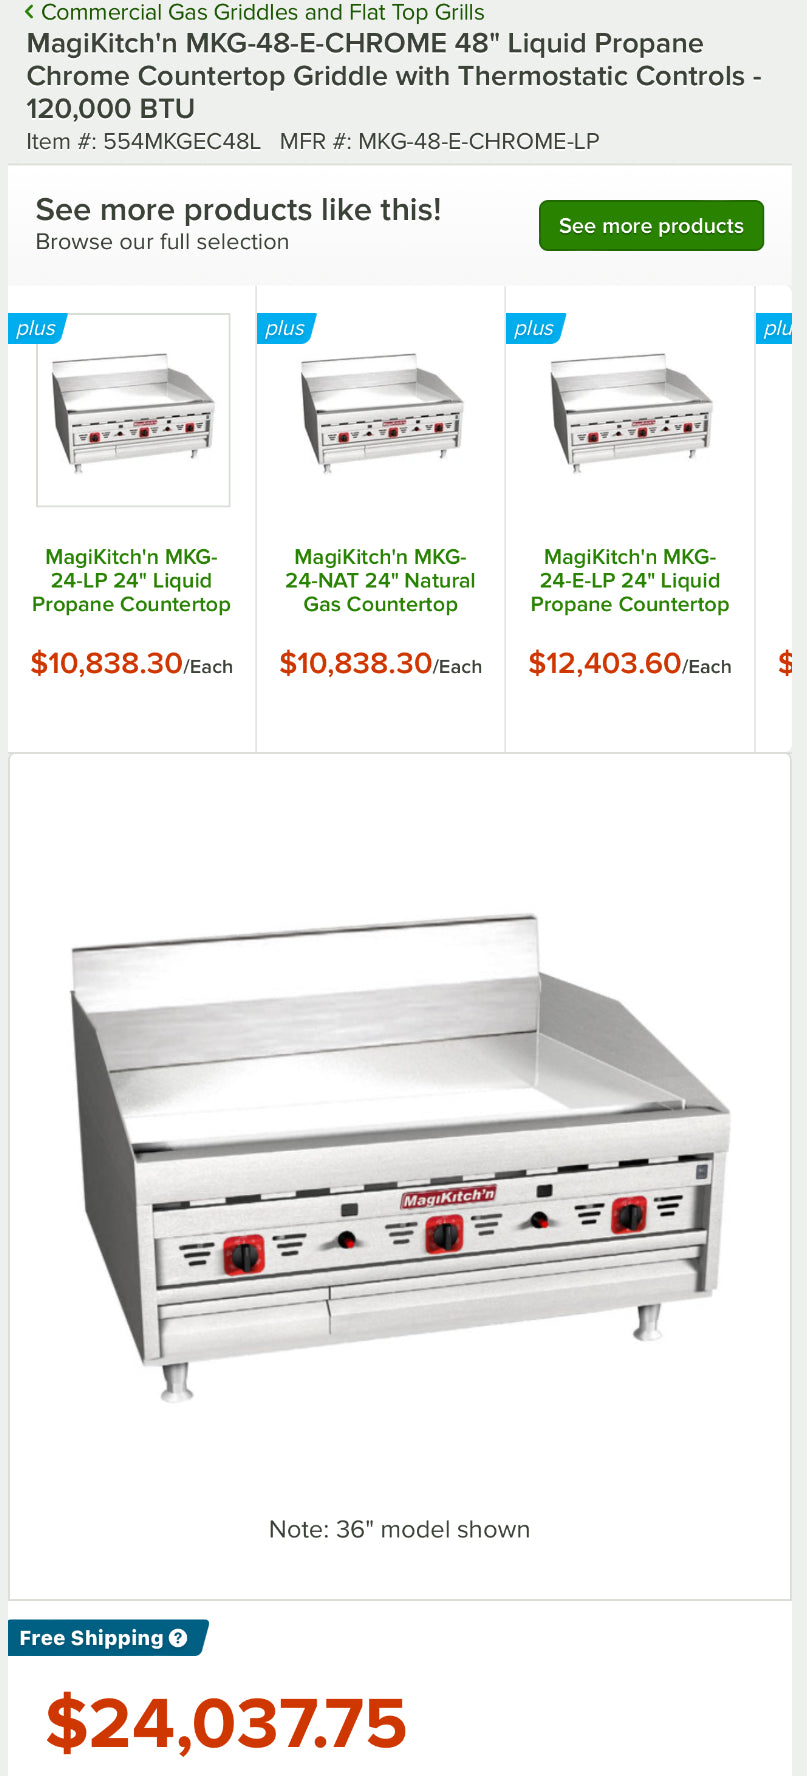 Unlock FREE Shipping!
Earn 3% Back*
Commercial Gas Griddles and Flat Top Grills
MagiKitch'n MKG-48-E-CHROME 48" Chrome Countertop Griddle with Thermostatic Controls - 120,000 BTU